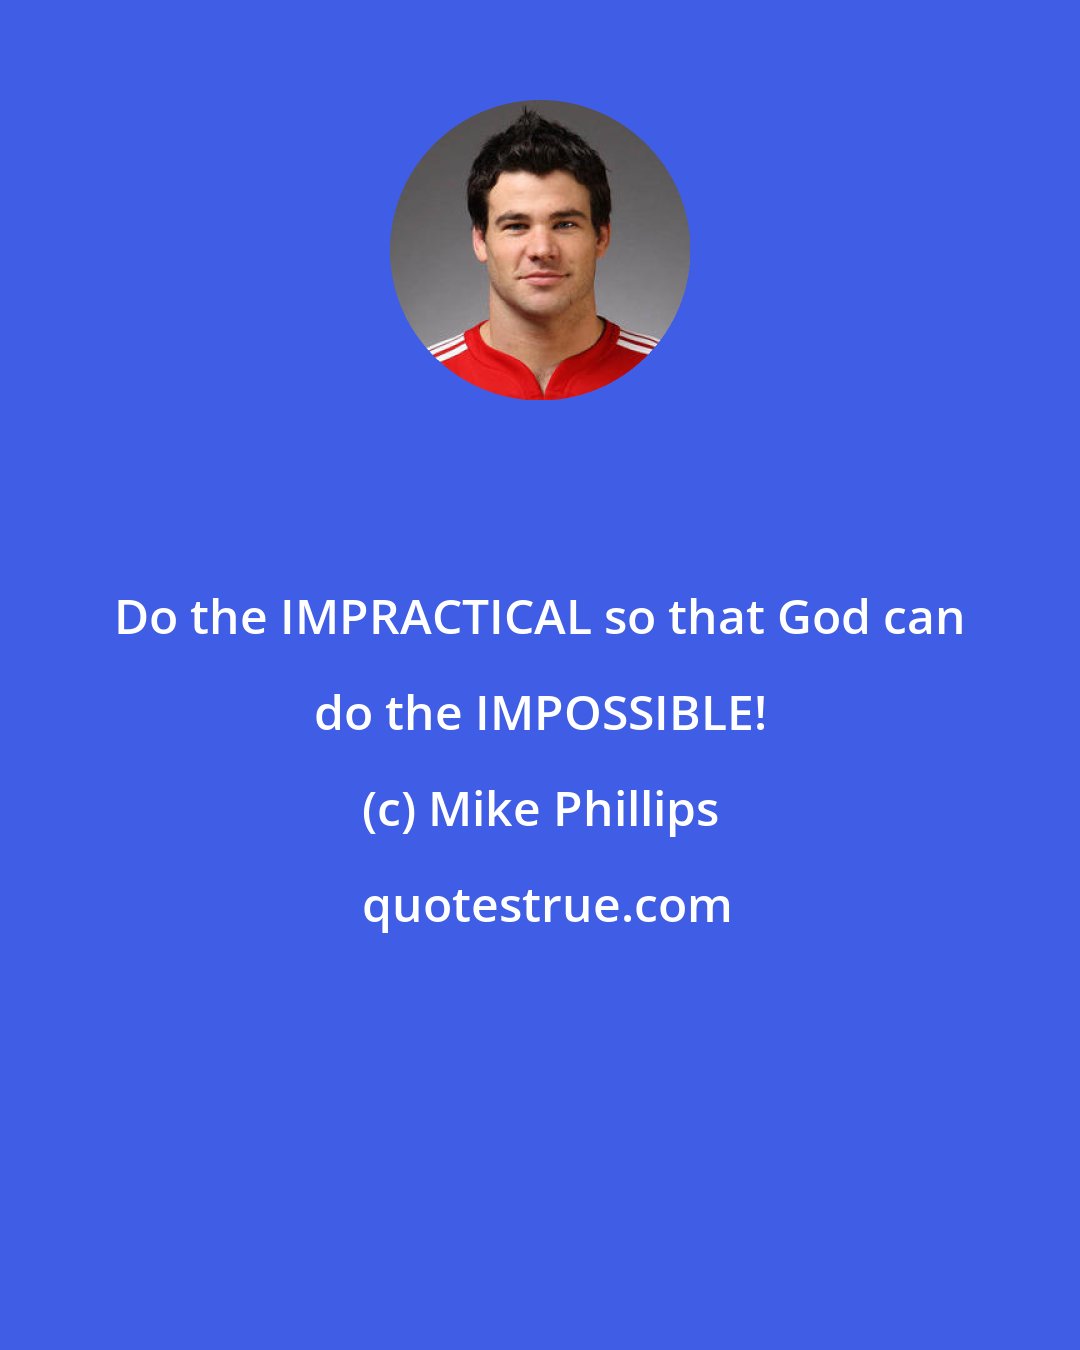 Mike Phillips: Do the IMPRACTICAL so that God can do the IMPOSSIBLE!